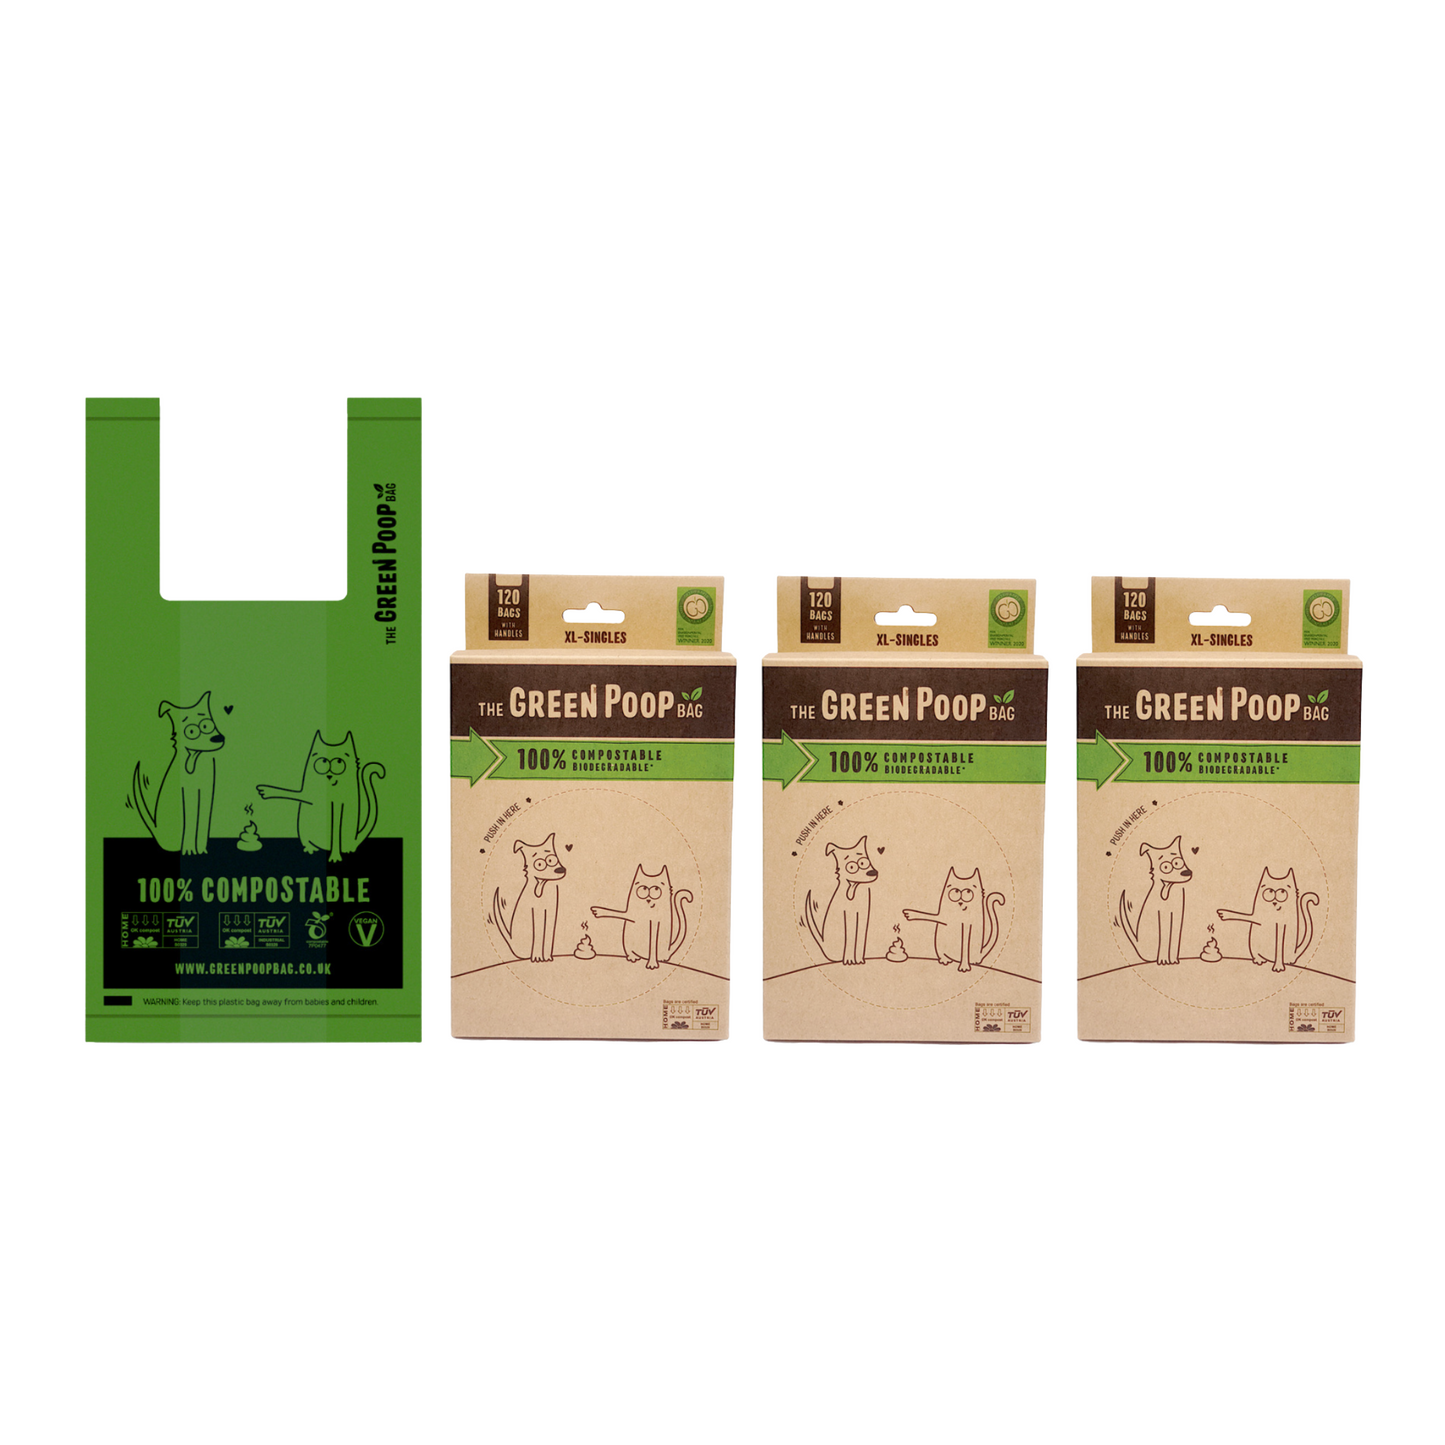 The Green Poop Bag Compostable Dog Poop Bags With Handles Loose In A Box Available In Quantities Of 120, 240 & 360 SAVE The More You Buy - Perfect For Large Size Poops